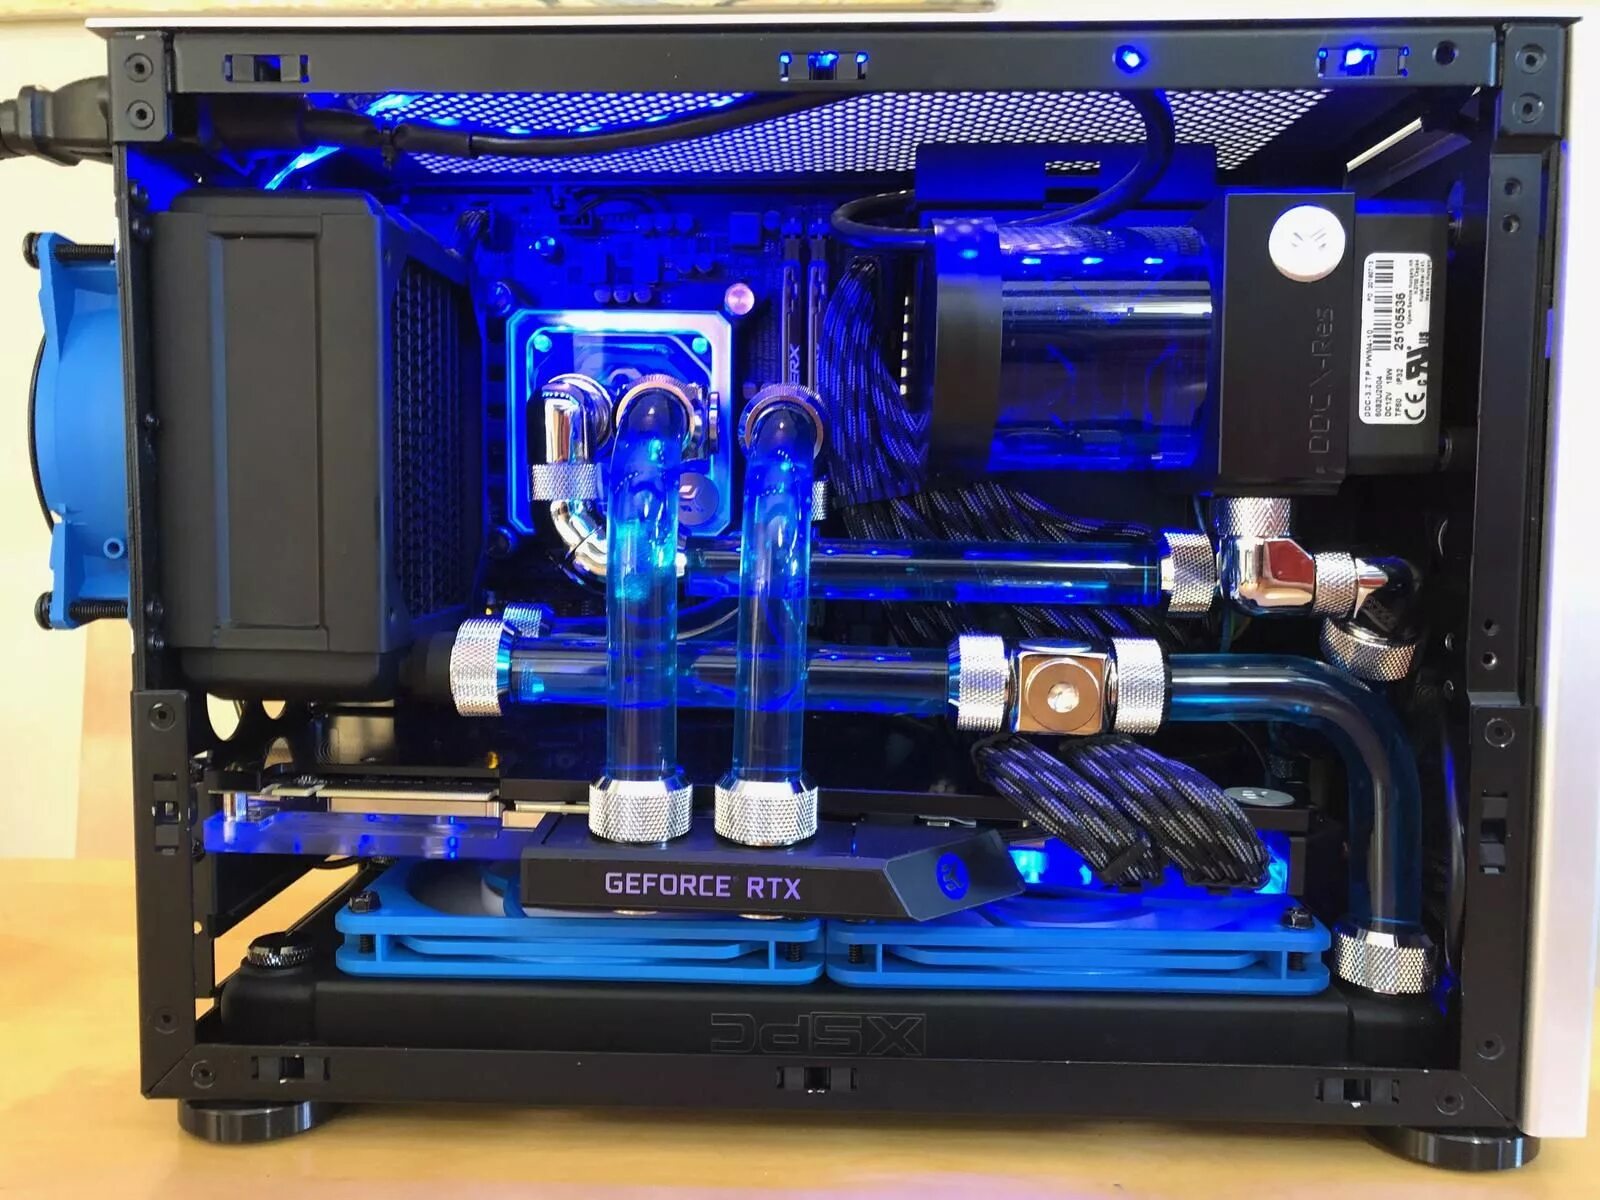 Completed builds. RTX 2080 Mini ITX. NCASE m1. Mini ITX Water Cooling. NCASE m1 v6.1.